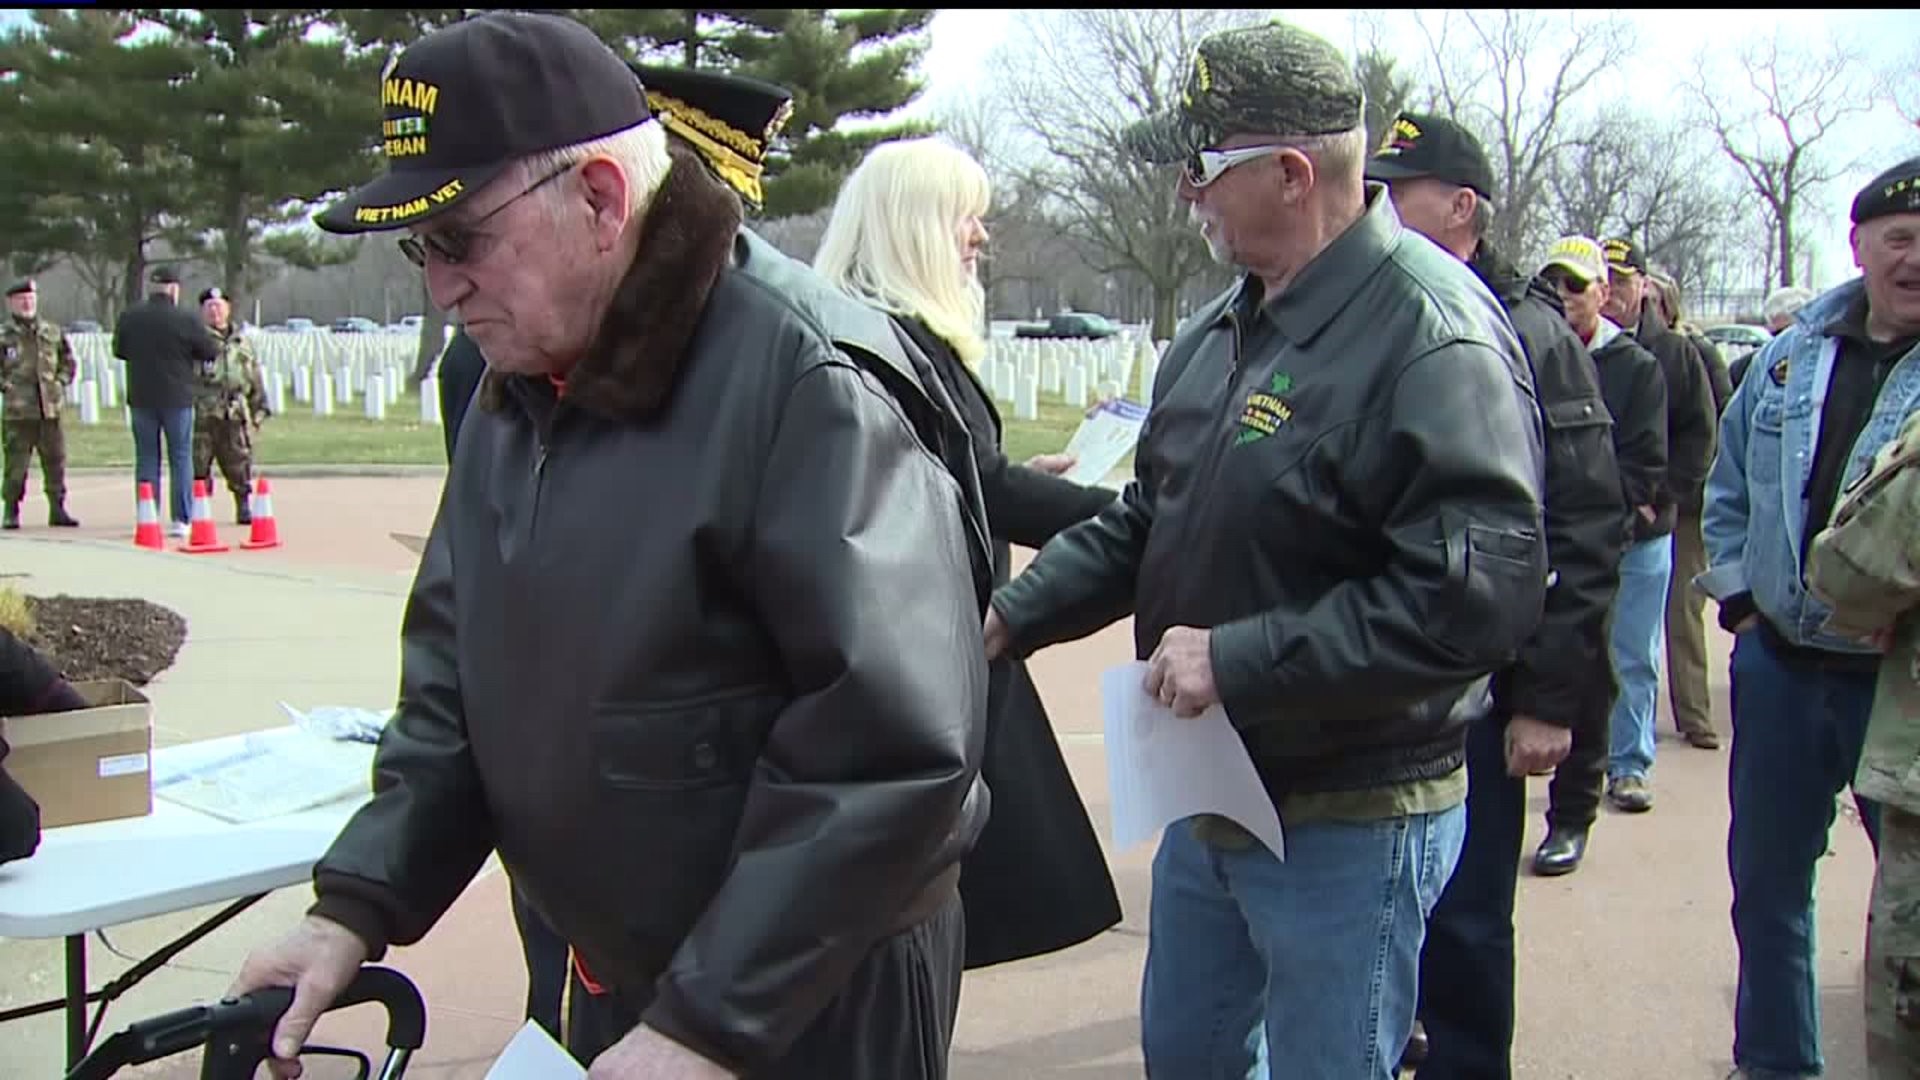 Local veterans recognized for their service and sacrafice